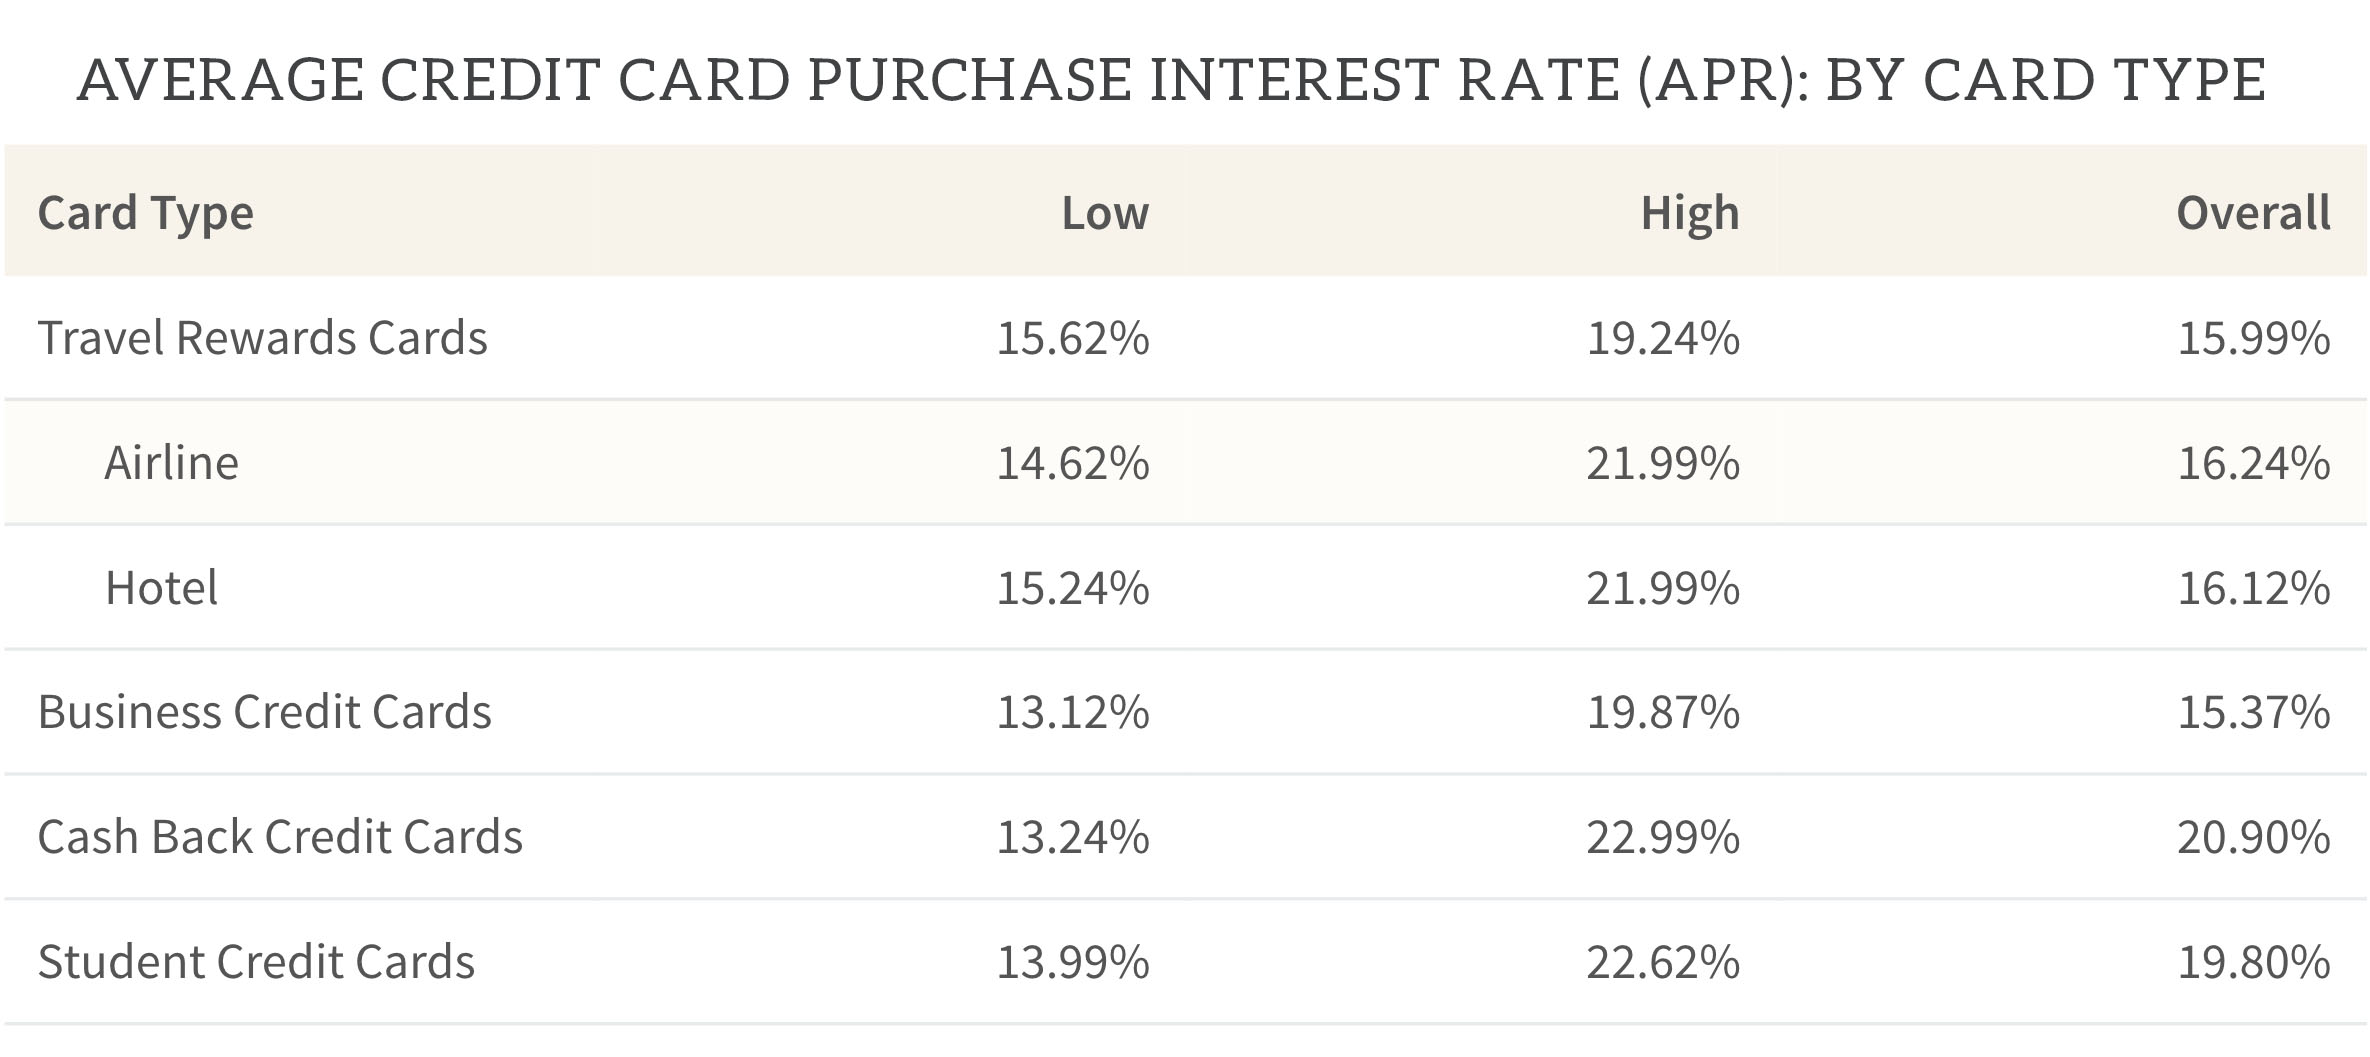 avg credit card purchase interest rate